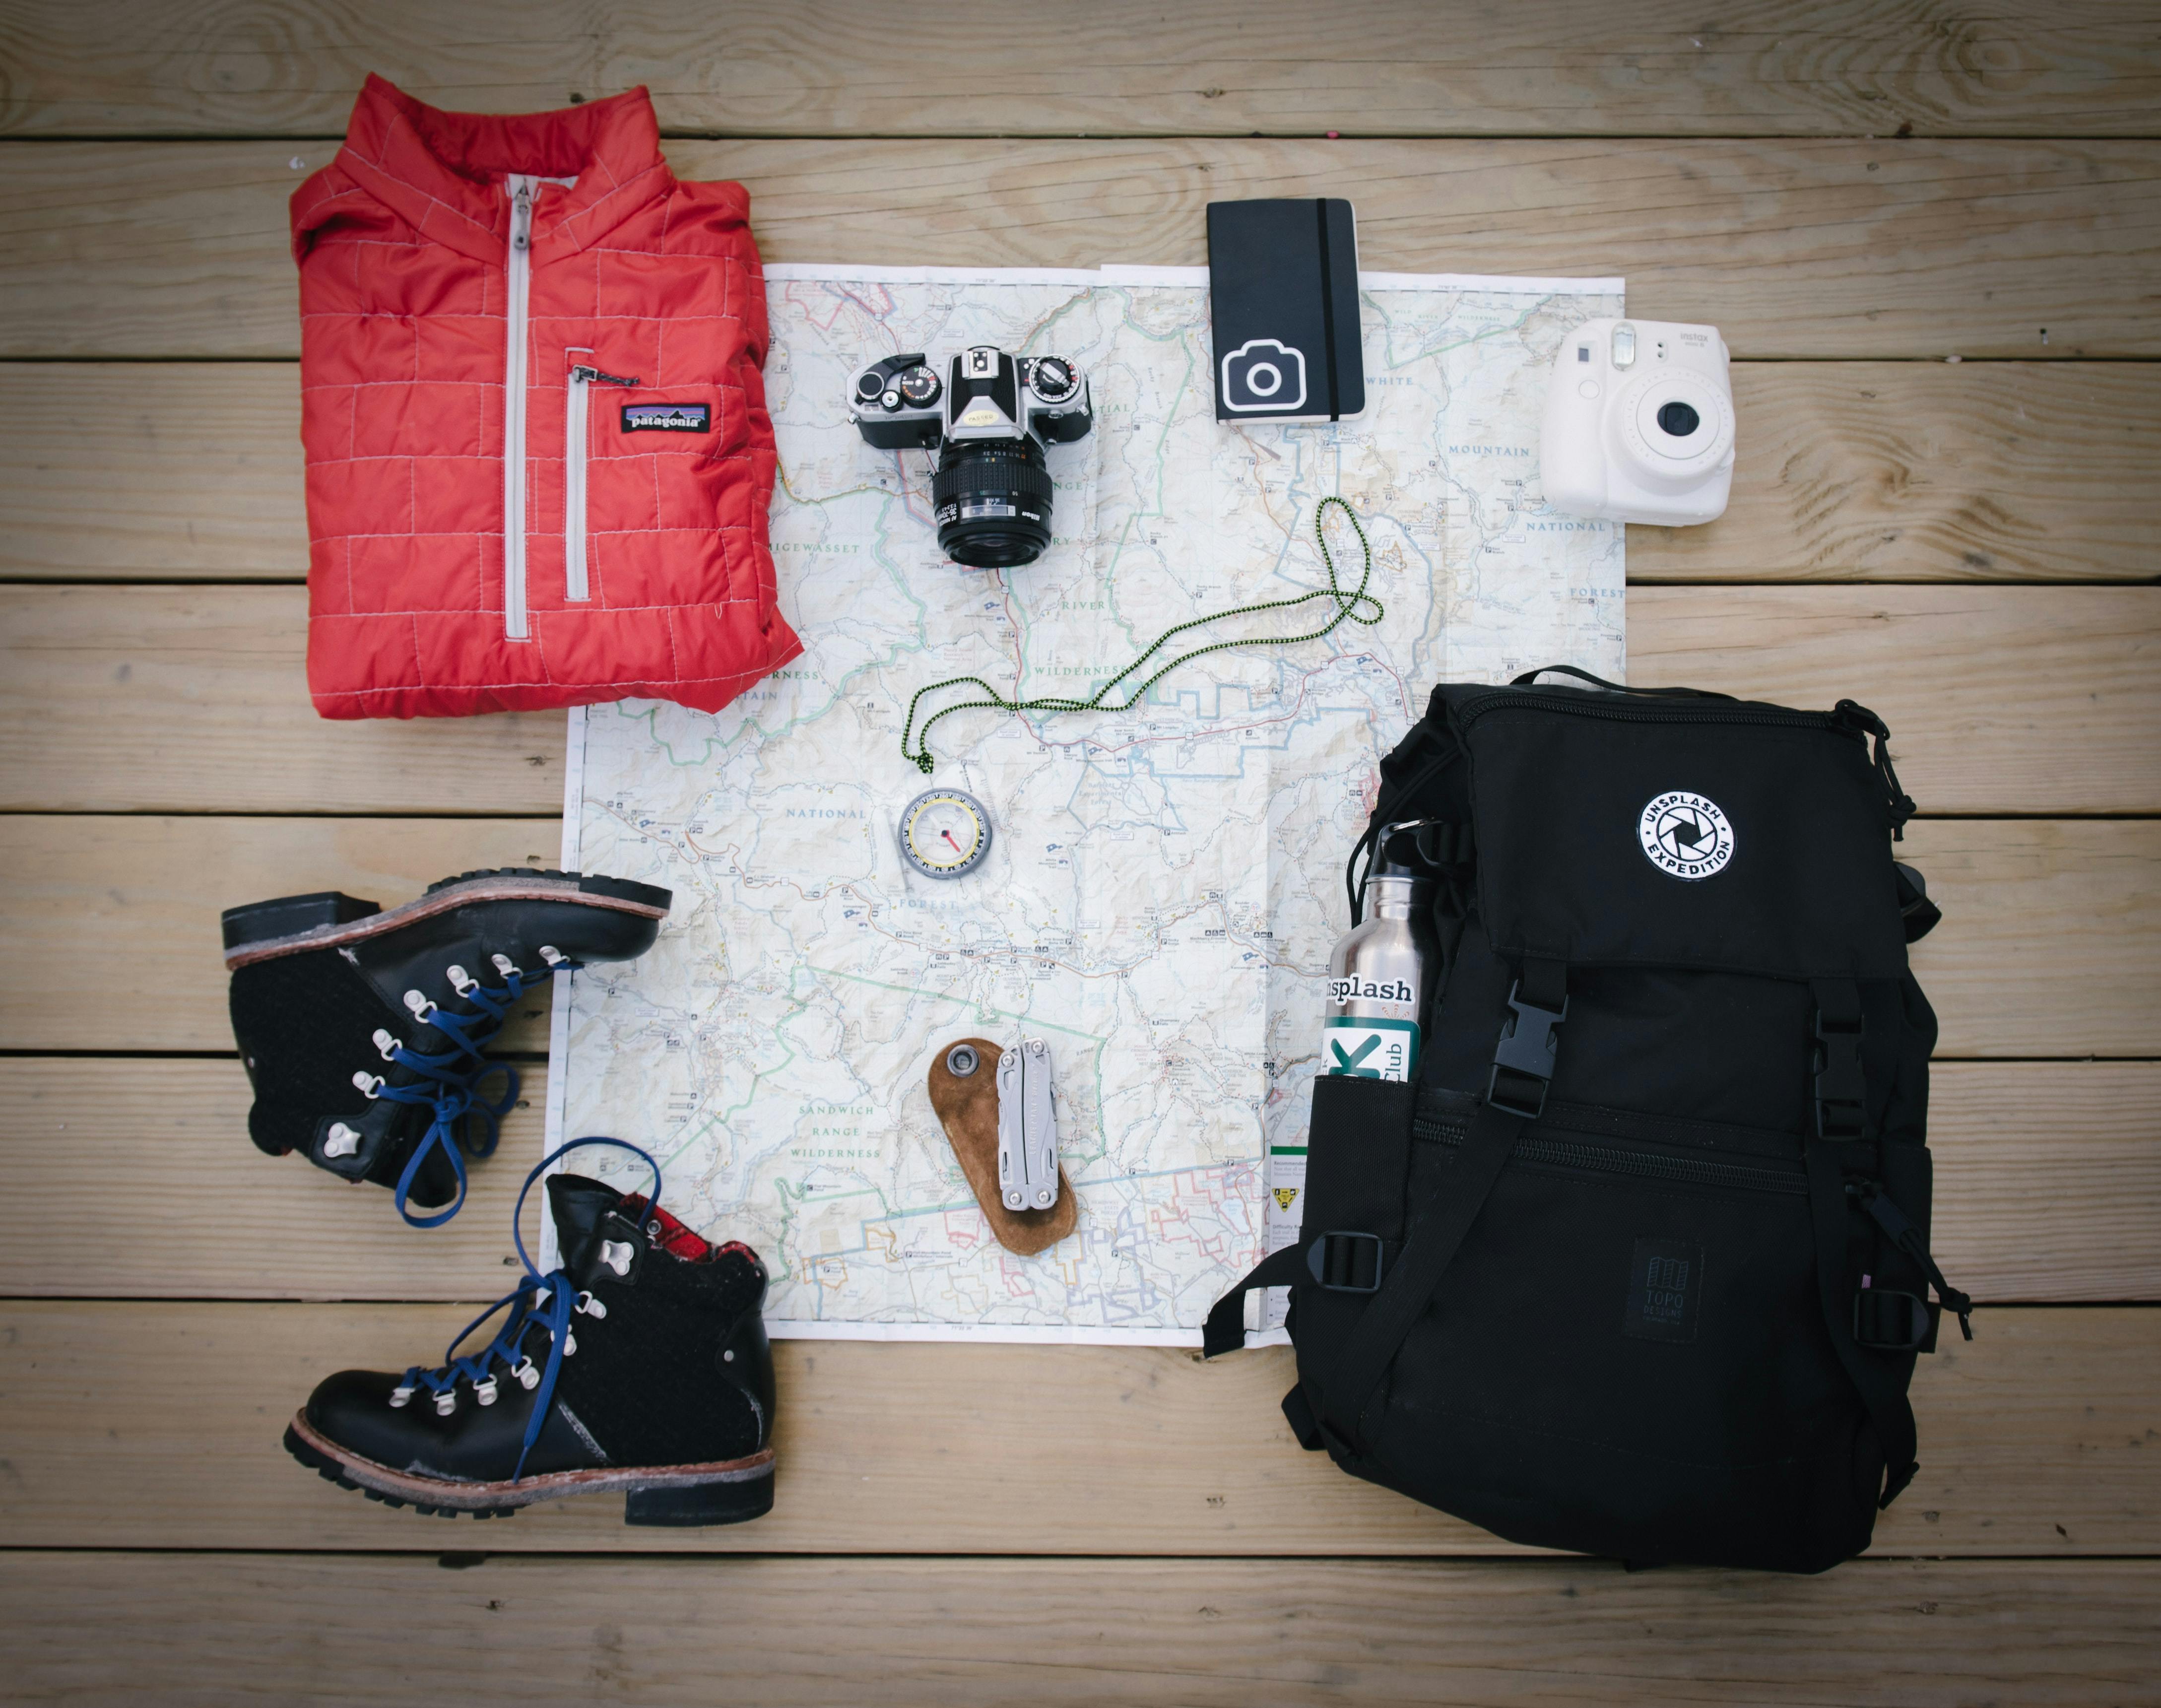 A map, hiking boots, red jacket, black backpack, camera, compass, journal, and camera on the ground